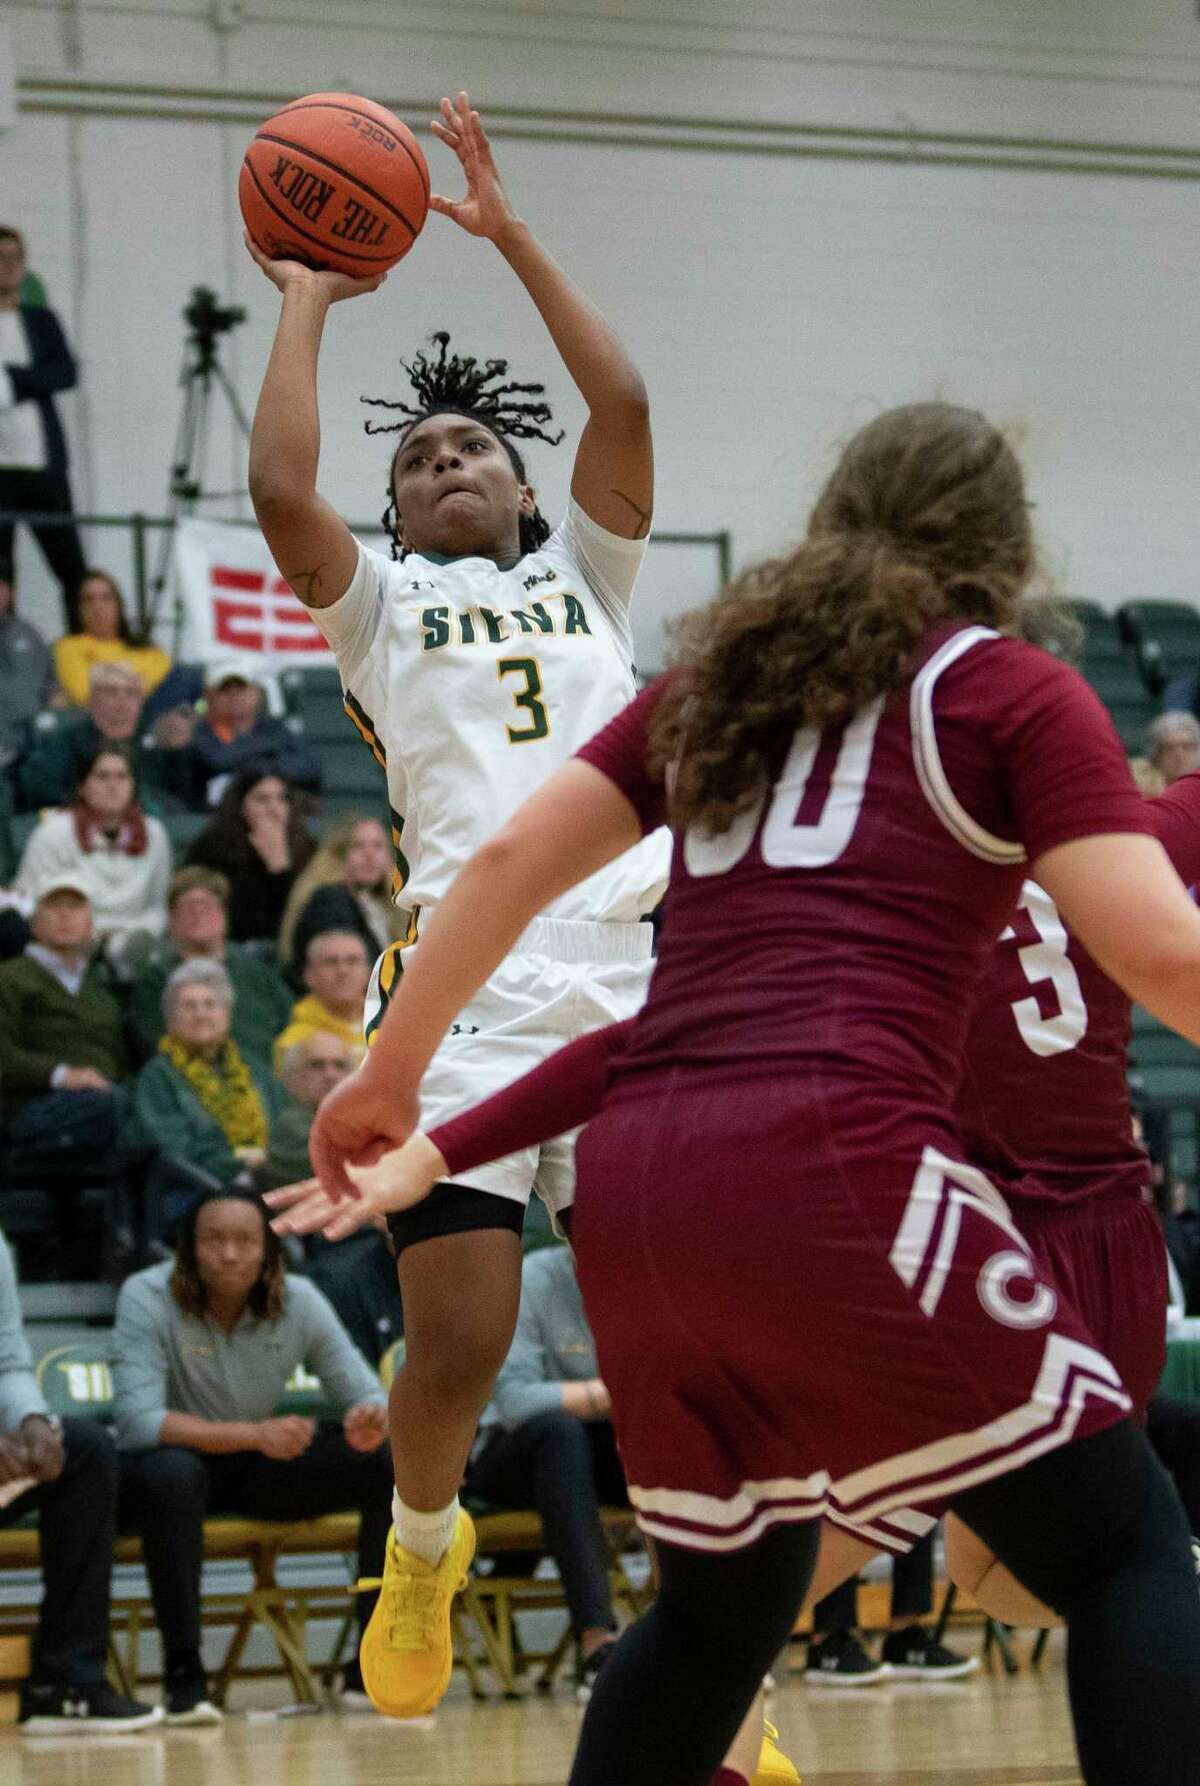 Siena’s Rayshel Brown takes a shot during a basketball game against Colgate at Siena College on Thursday, Dec. 2, 2021 in Loudonville, N.Y.